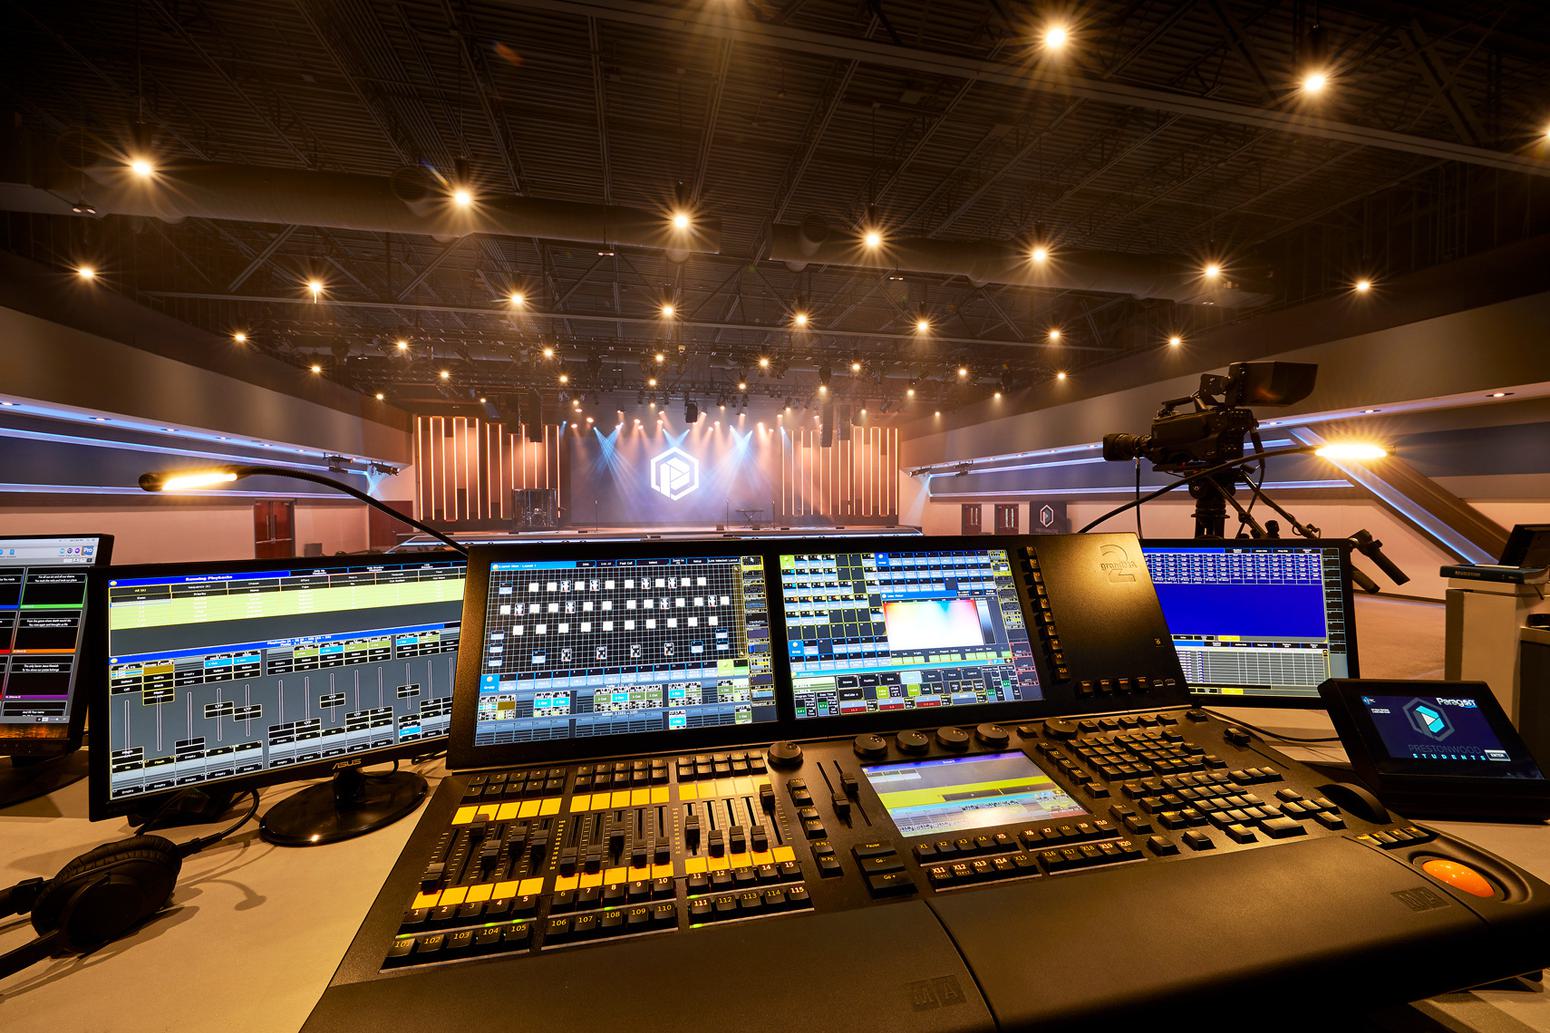 We train clients on our auditorium lighting systems controls like these.